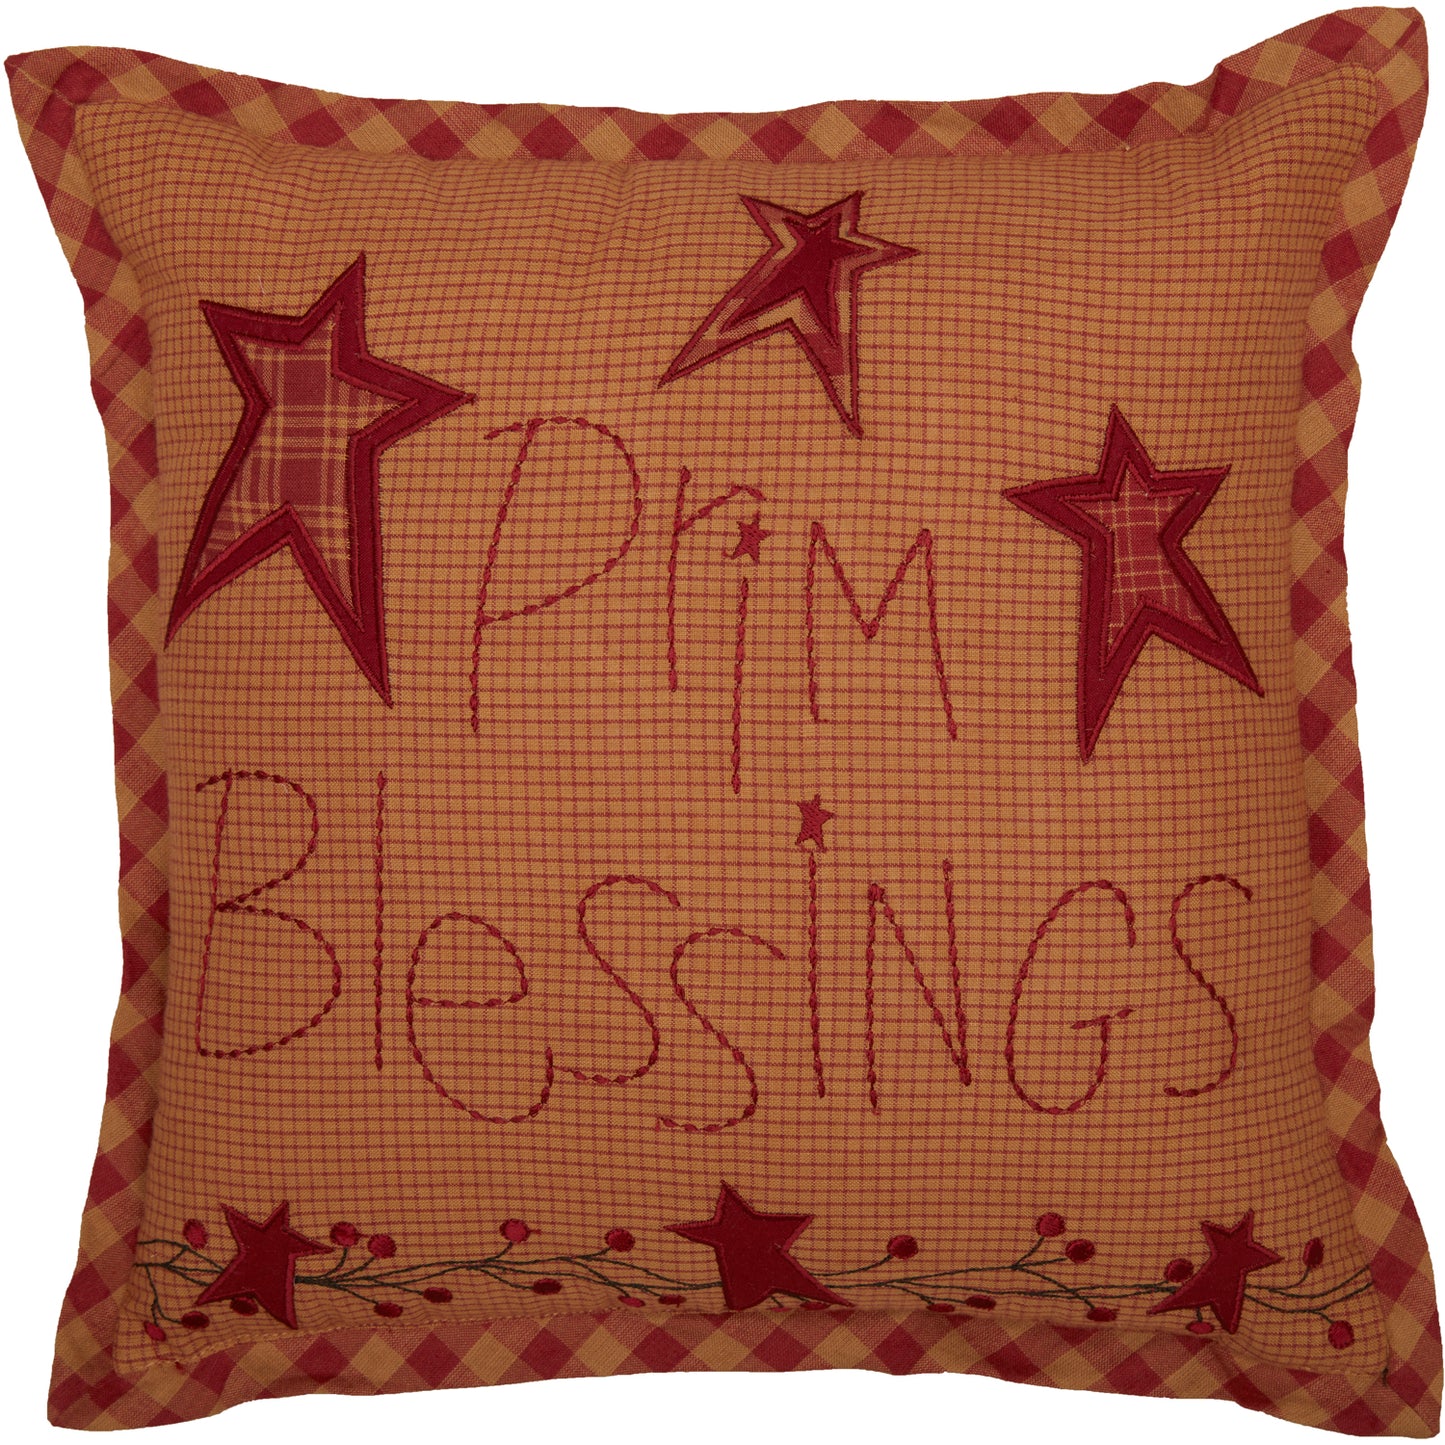 56743-Ninepatch-Star-Prim-Blessings-Pillow-12x12-image-4